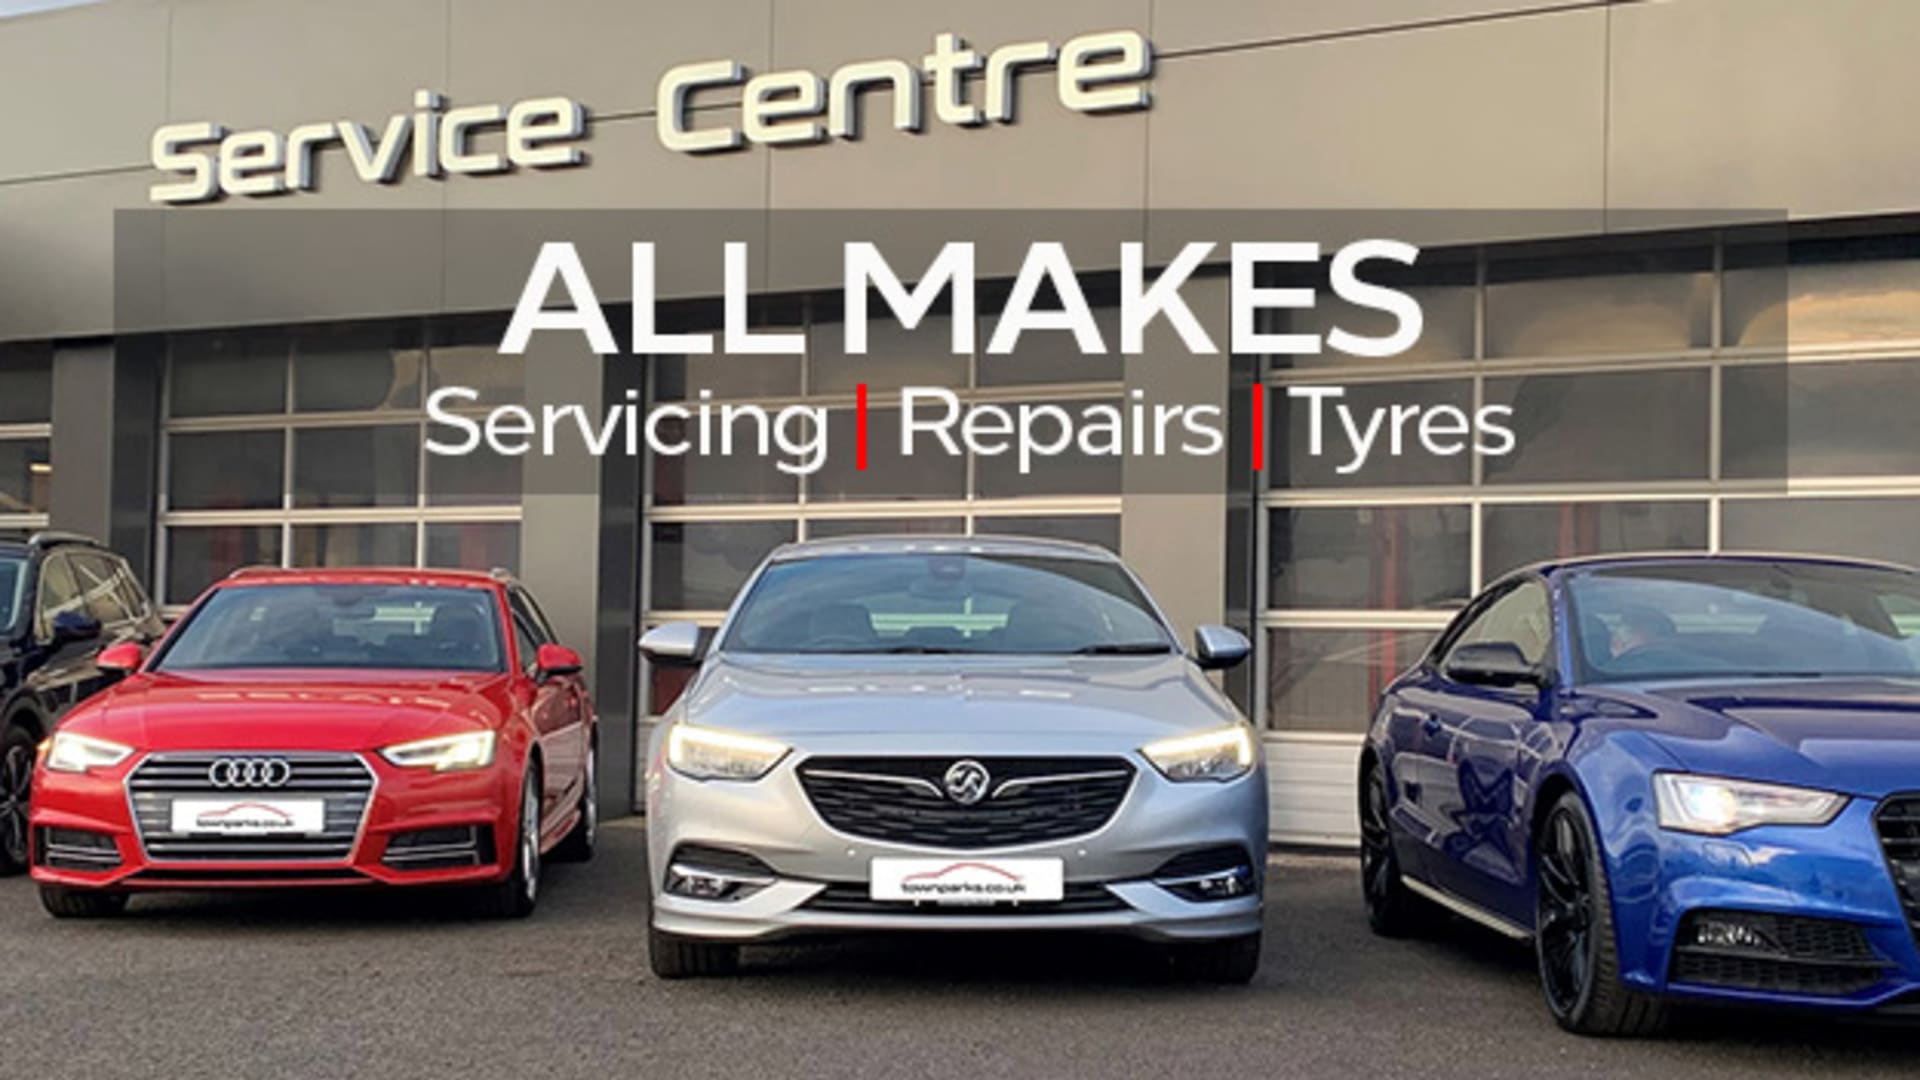 All Makes Servicing Offers